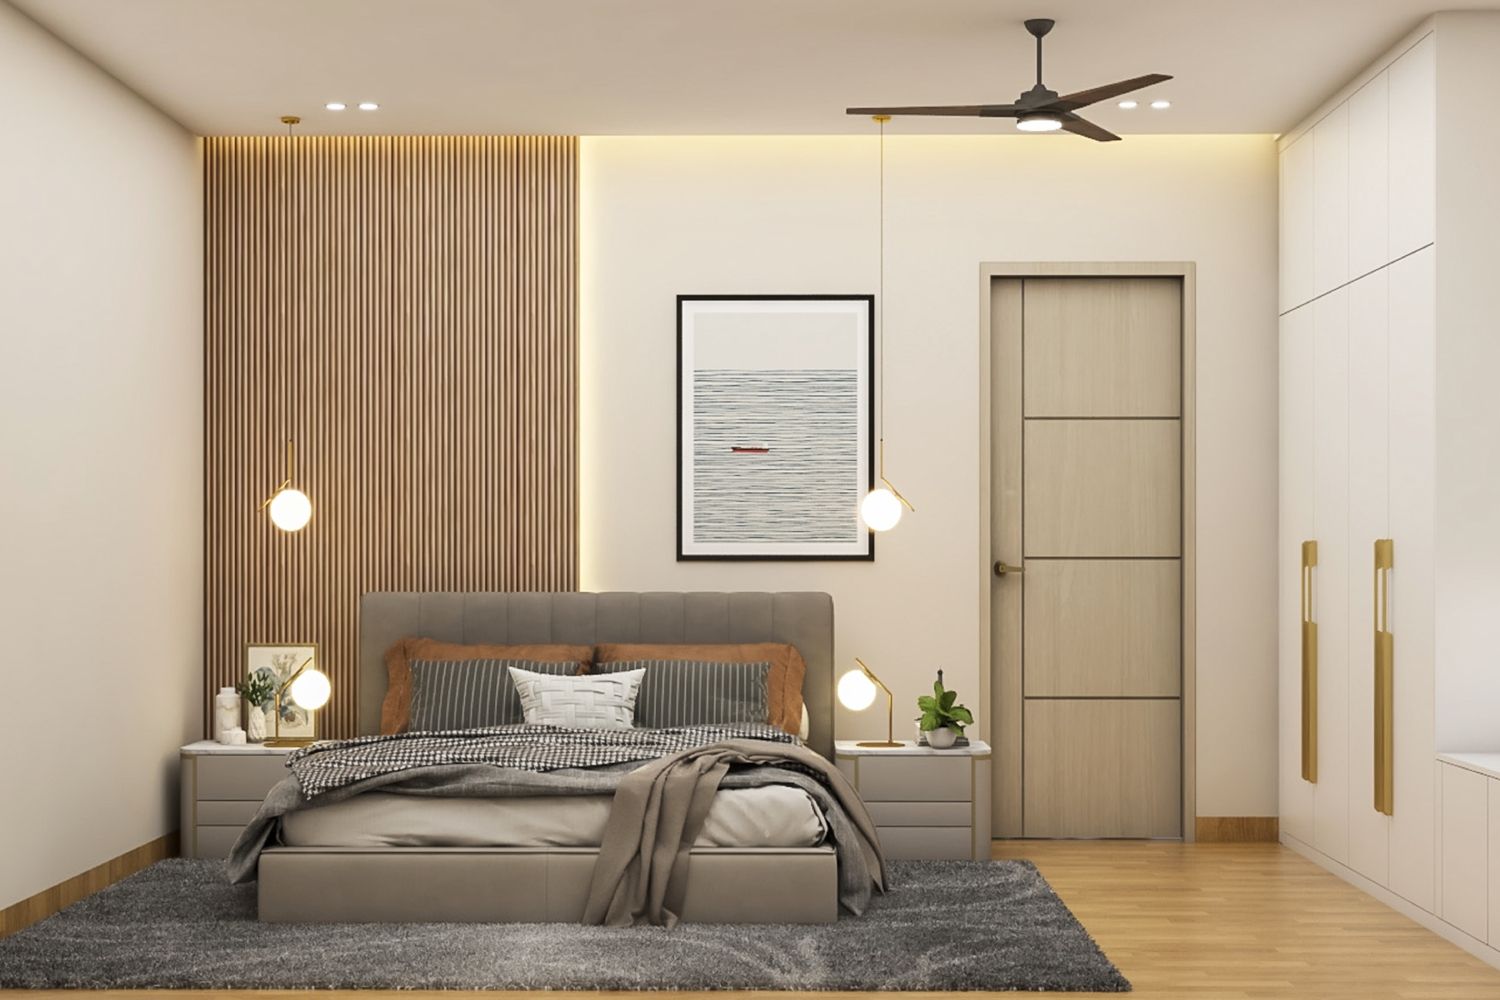 Modern Guest Bedroom Design With Fluted Wall Panels And LED Lighting